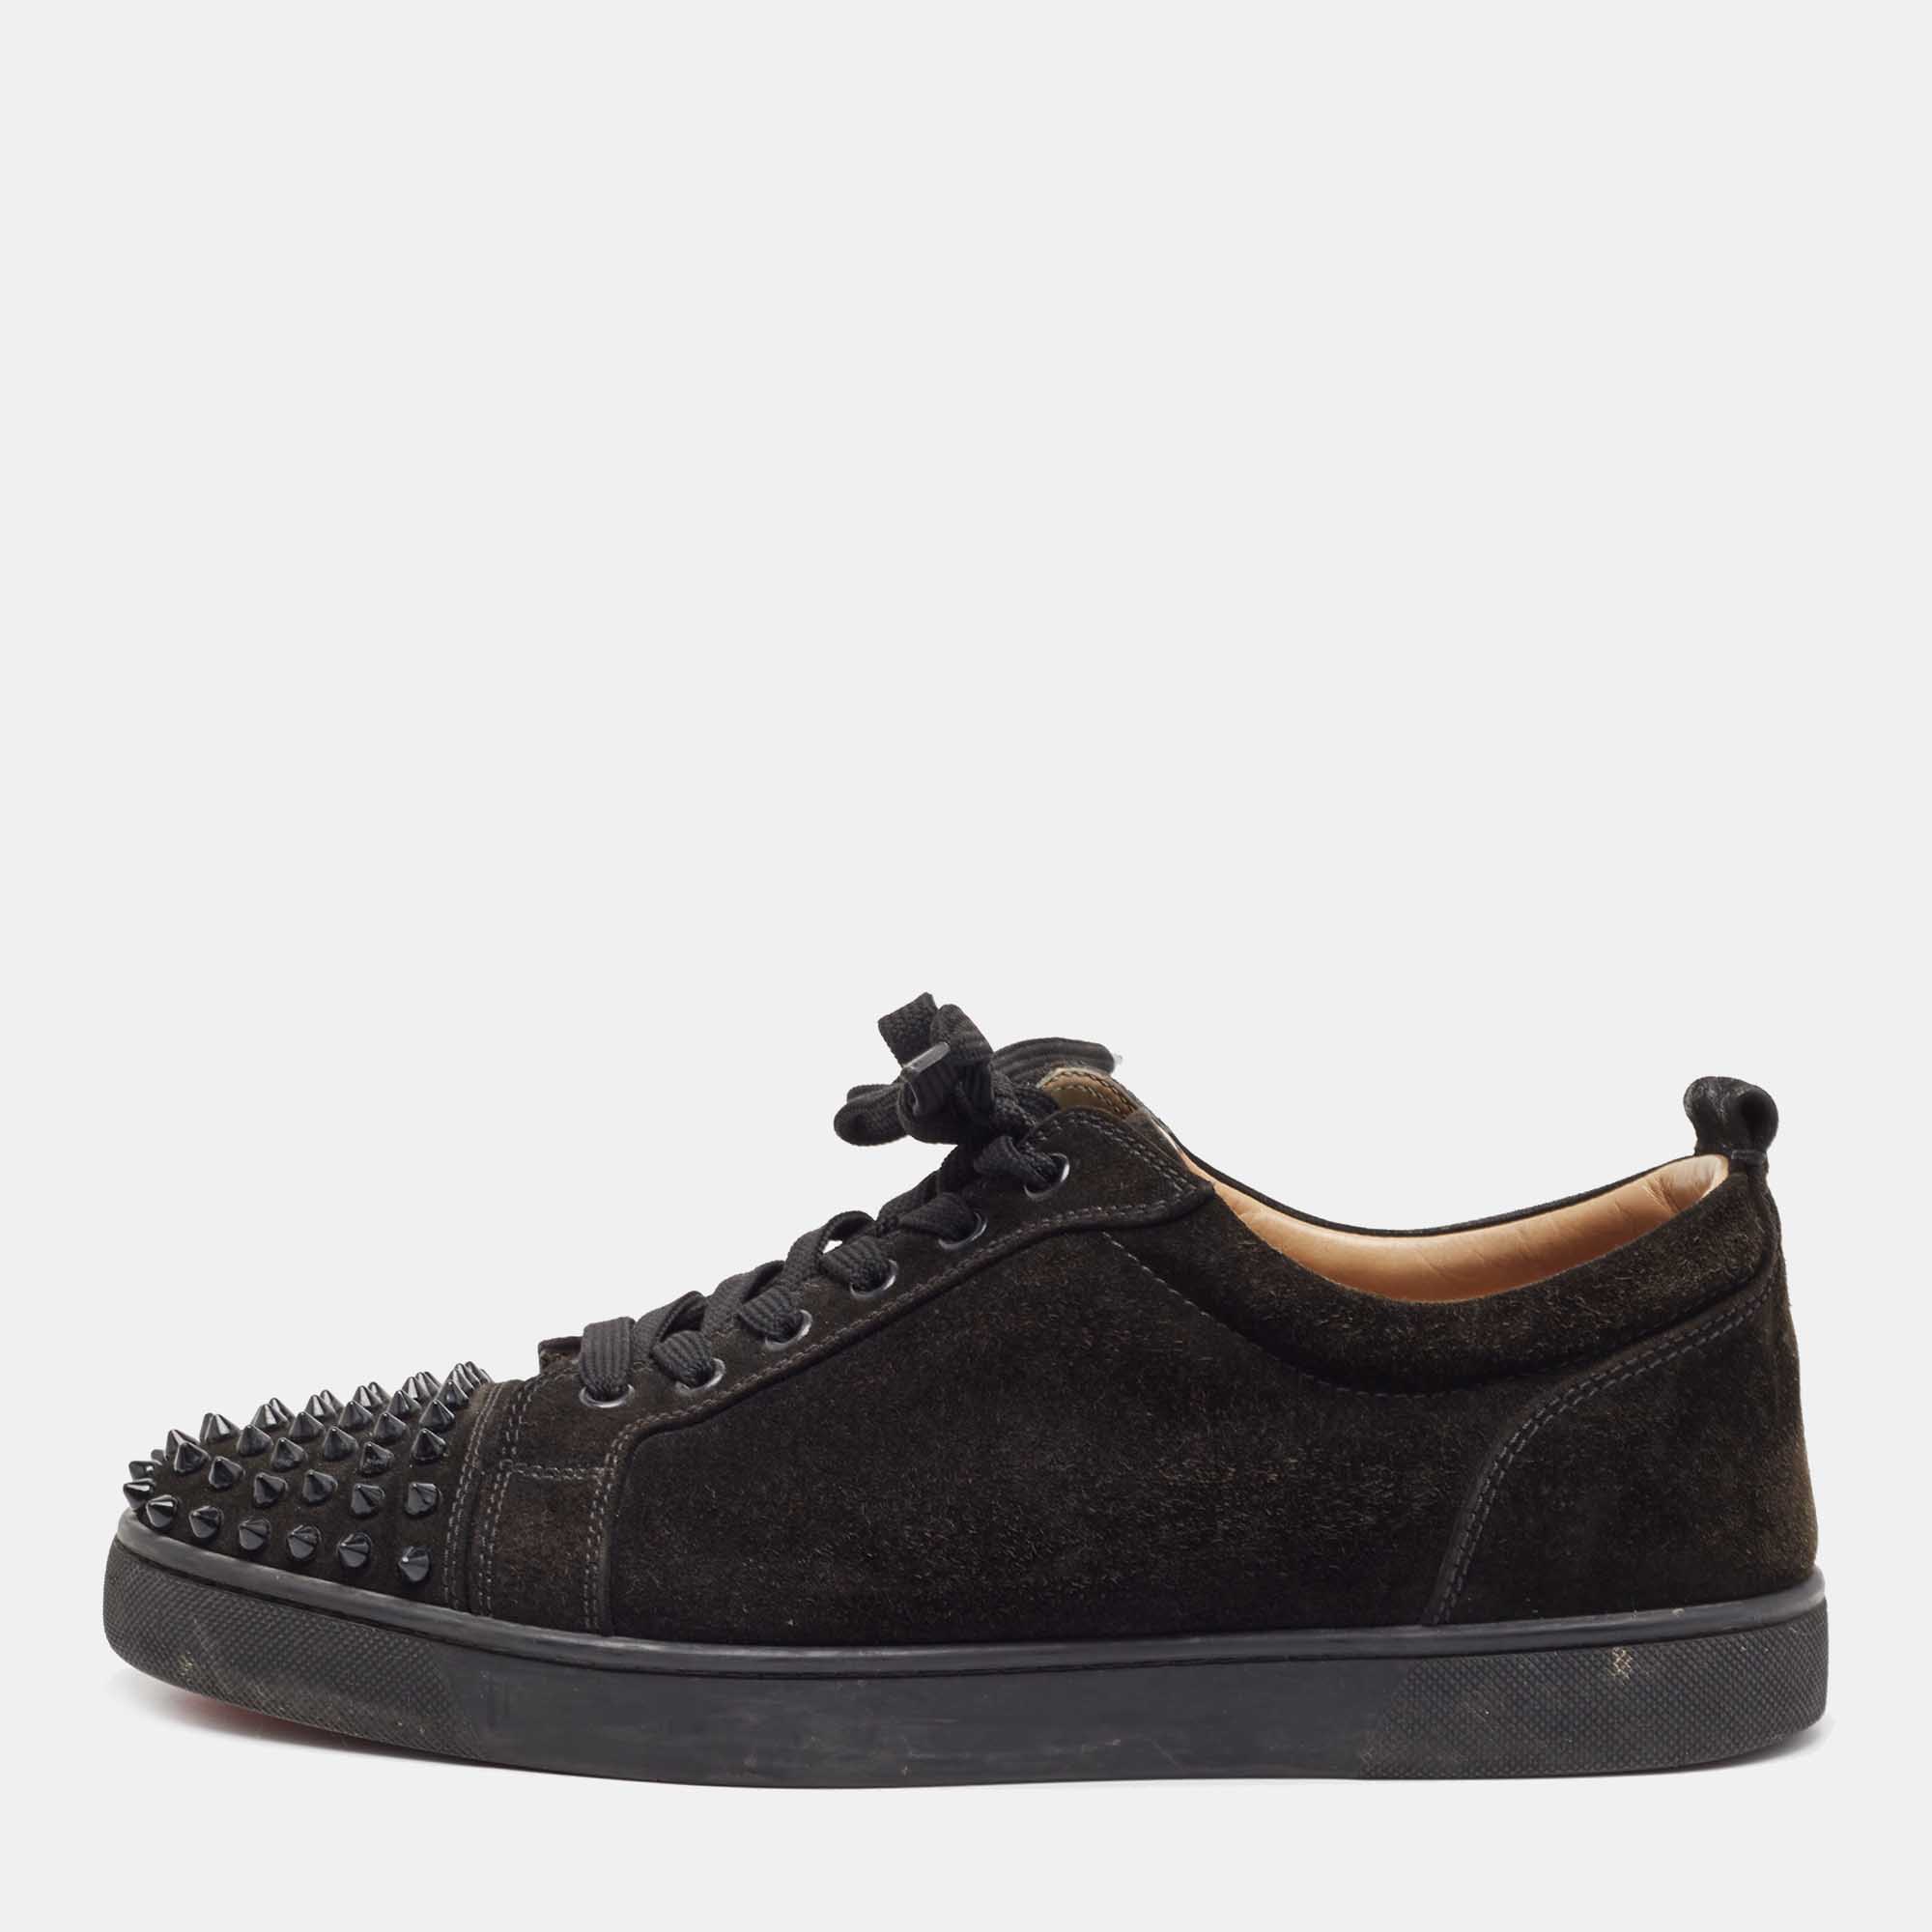  Christian Louboutin Men's Lou Spikes Black Canvas High Top  Sneakers (us_Footwear_Size_System, Adult, Men, Numeric, Medium, Numeric_6)